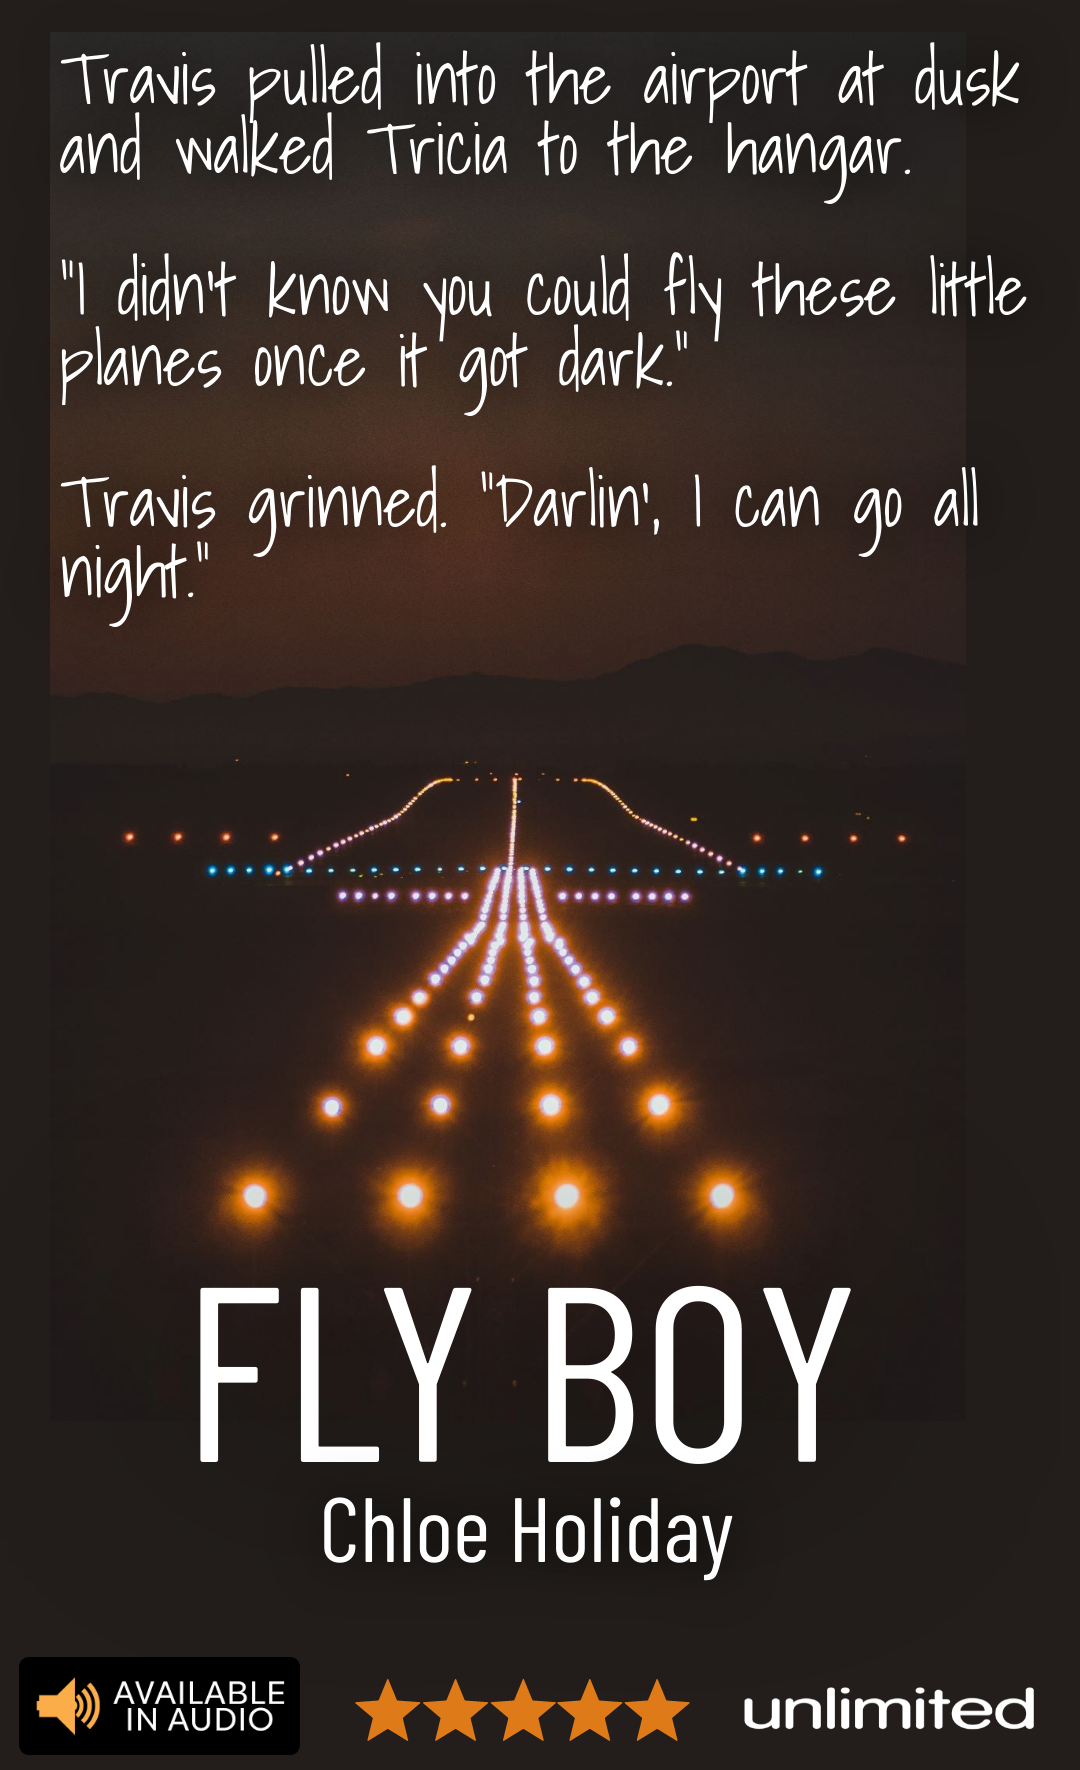 Early 5 star reviews for Chloe Holiday's Fly Boy